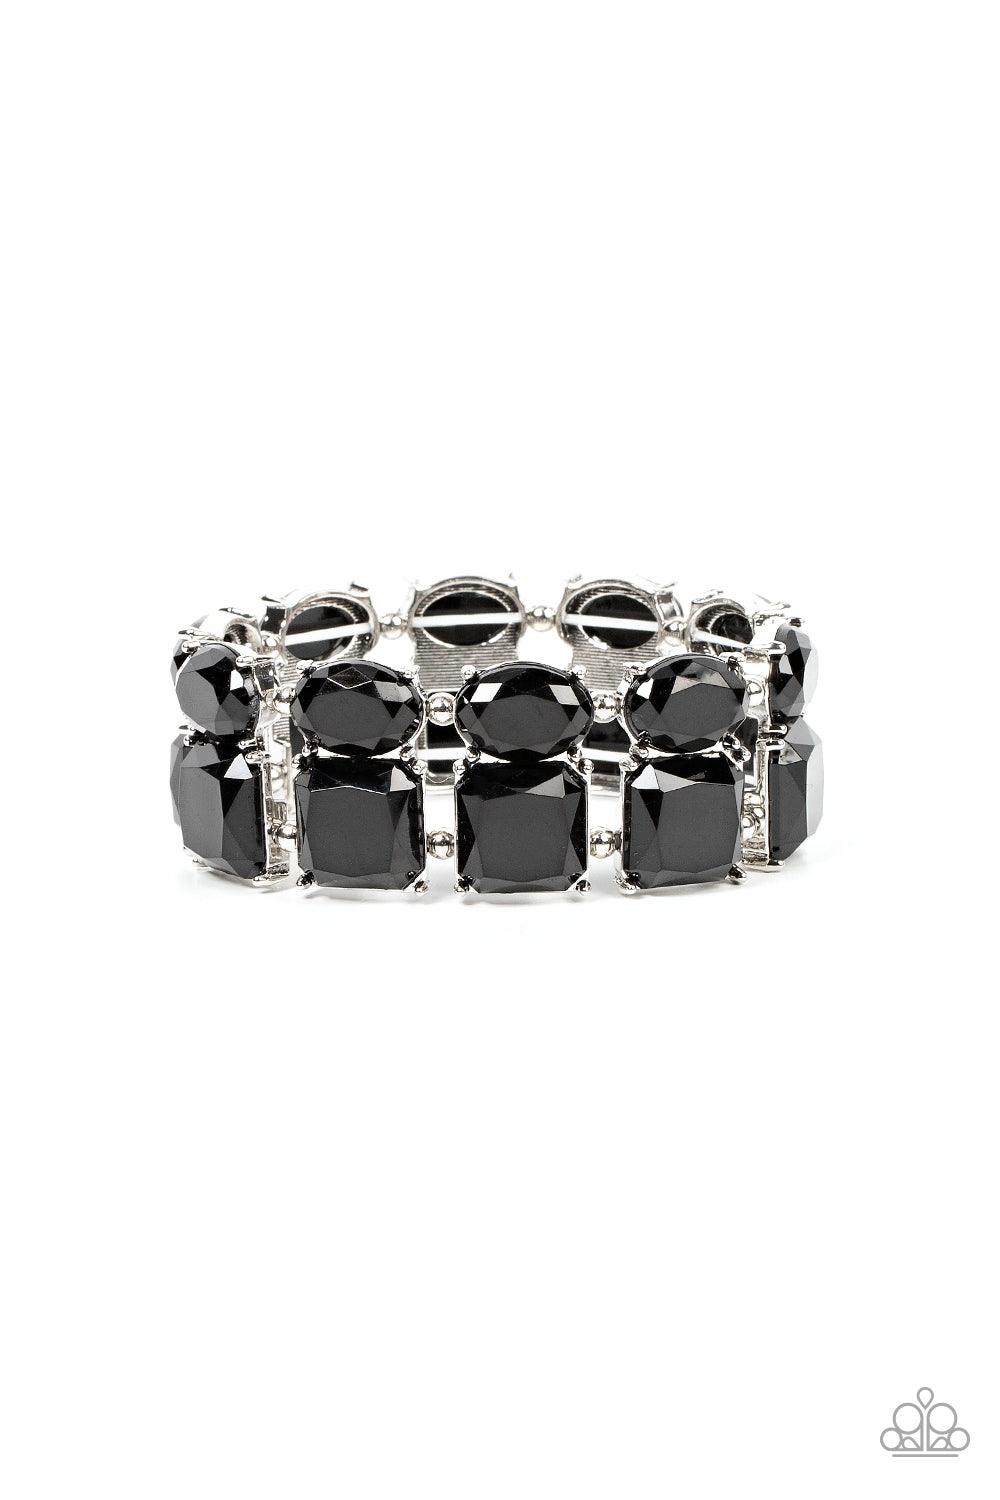 Paparazzi Accessories Dont Forget Your Toga - Black Separated by pairs of dainty silver beads, faceted stacks of oval and square cut black beads are threaded along a stretchy band around the wrist for a bold pop of color. Sold as one individual bracelet.